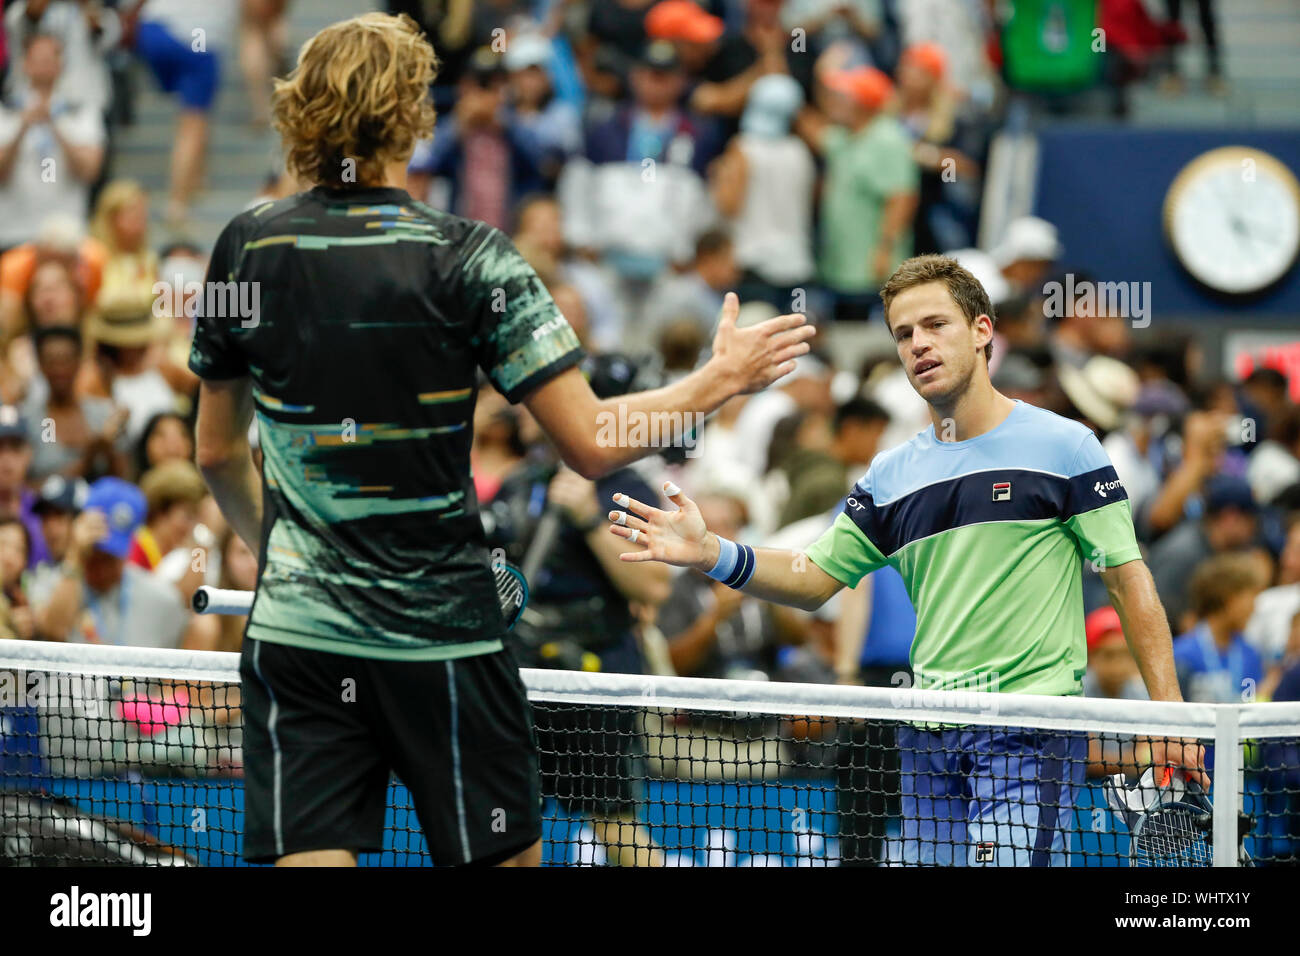 New York Usa 2nd Sep 2019 Diego Schwartzman R Of Argentina Shakes Hands With Alexander Zverev Of Germany After The Men S Singles Fourth Round Match At The 2019 Us Open In New